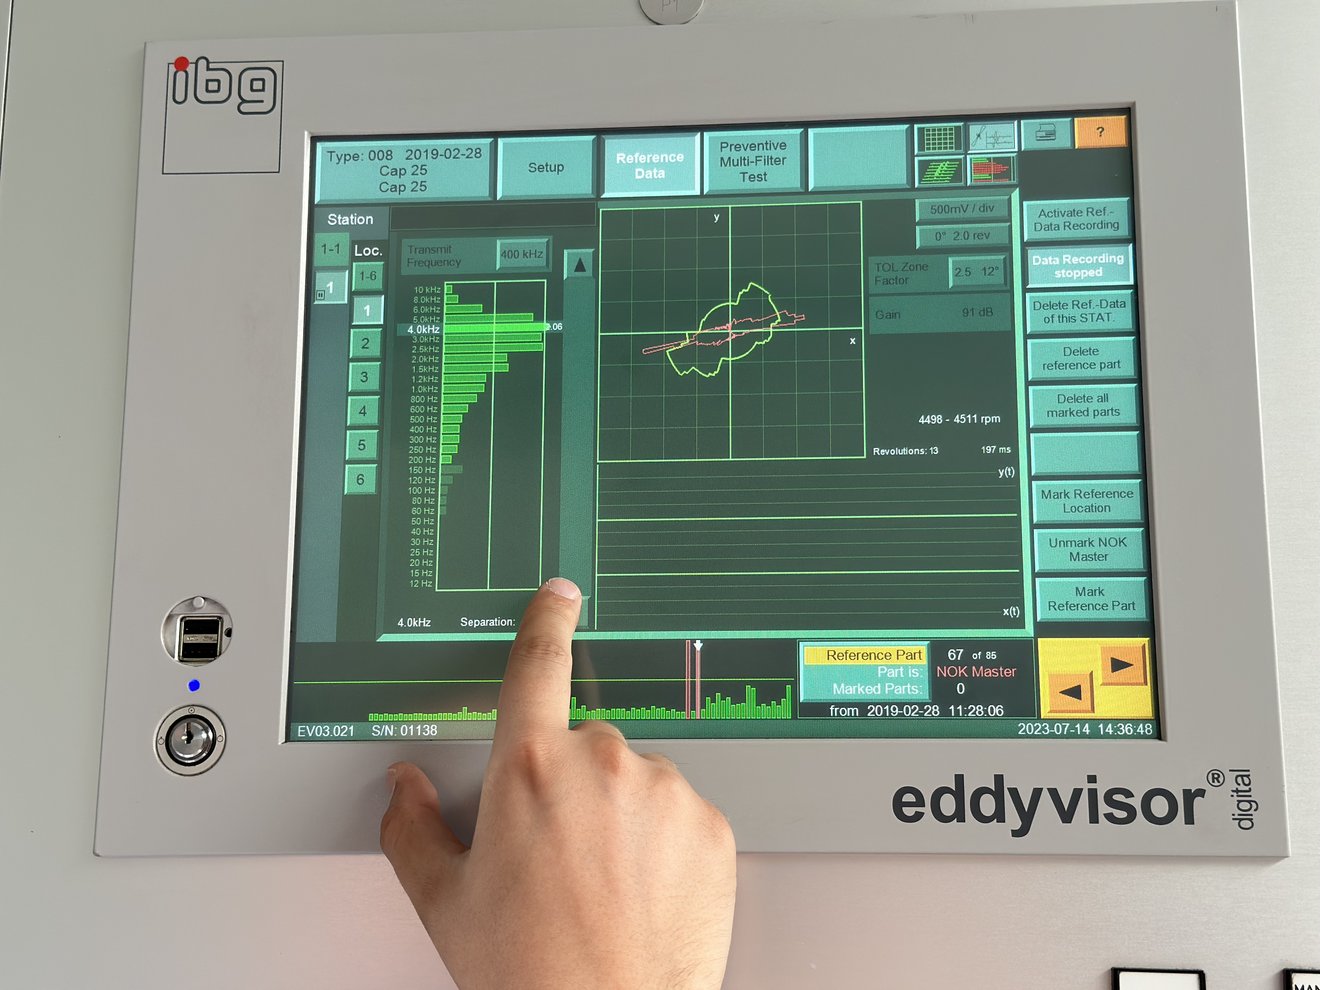 eddyvisor screen, a finger pointing at the results